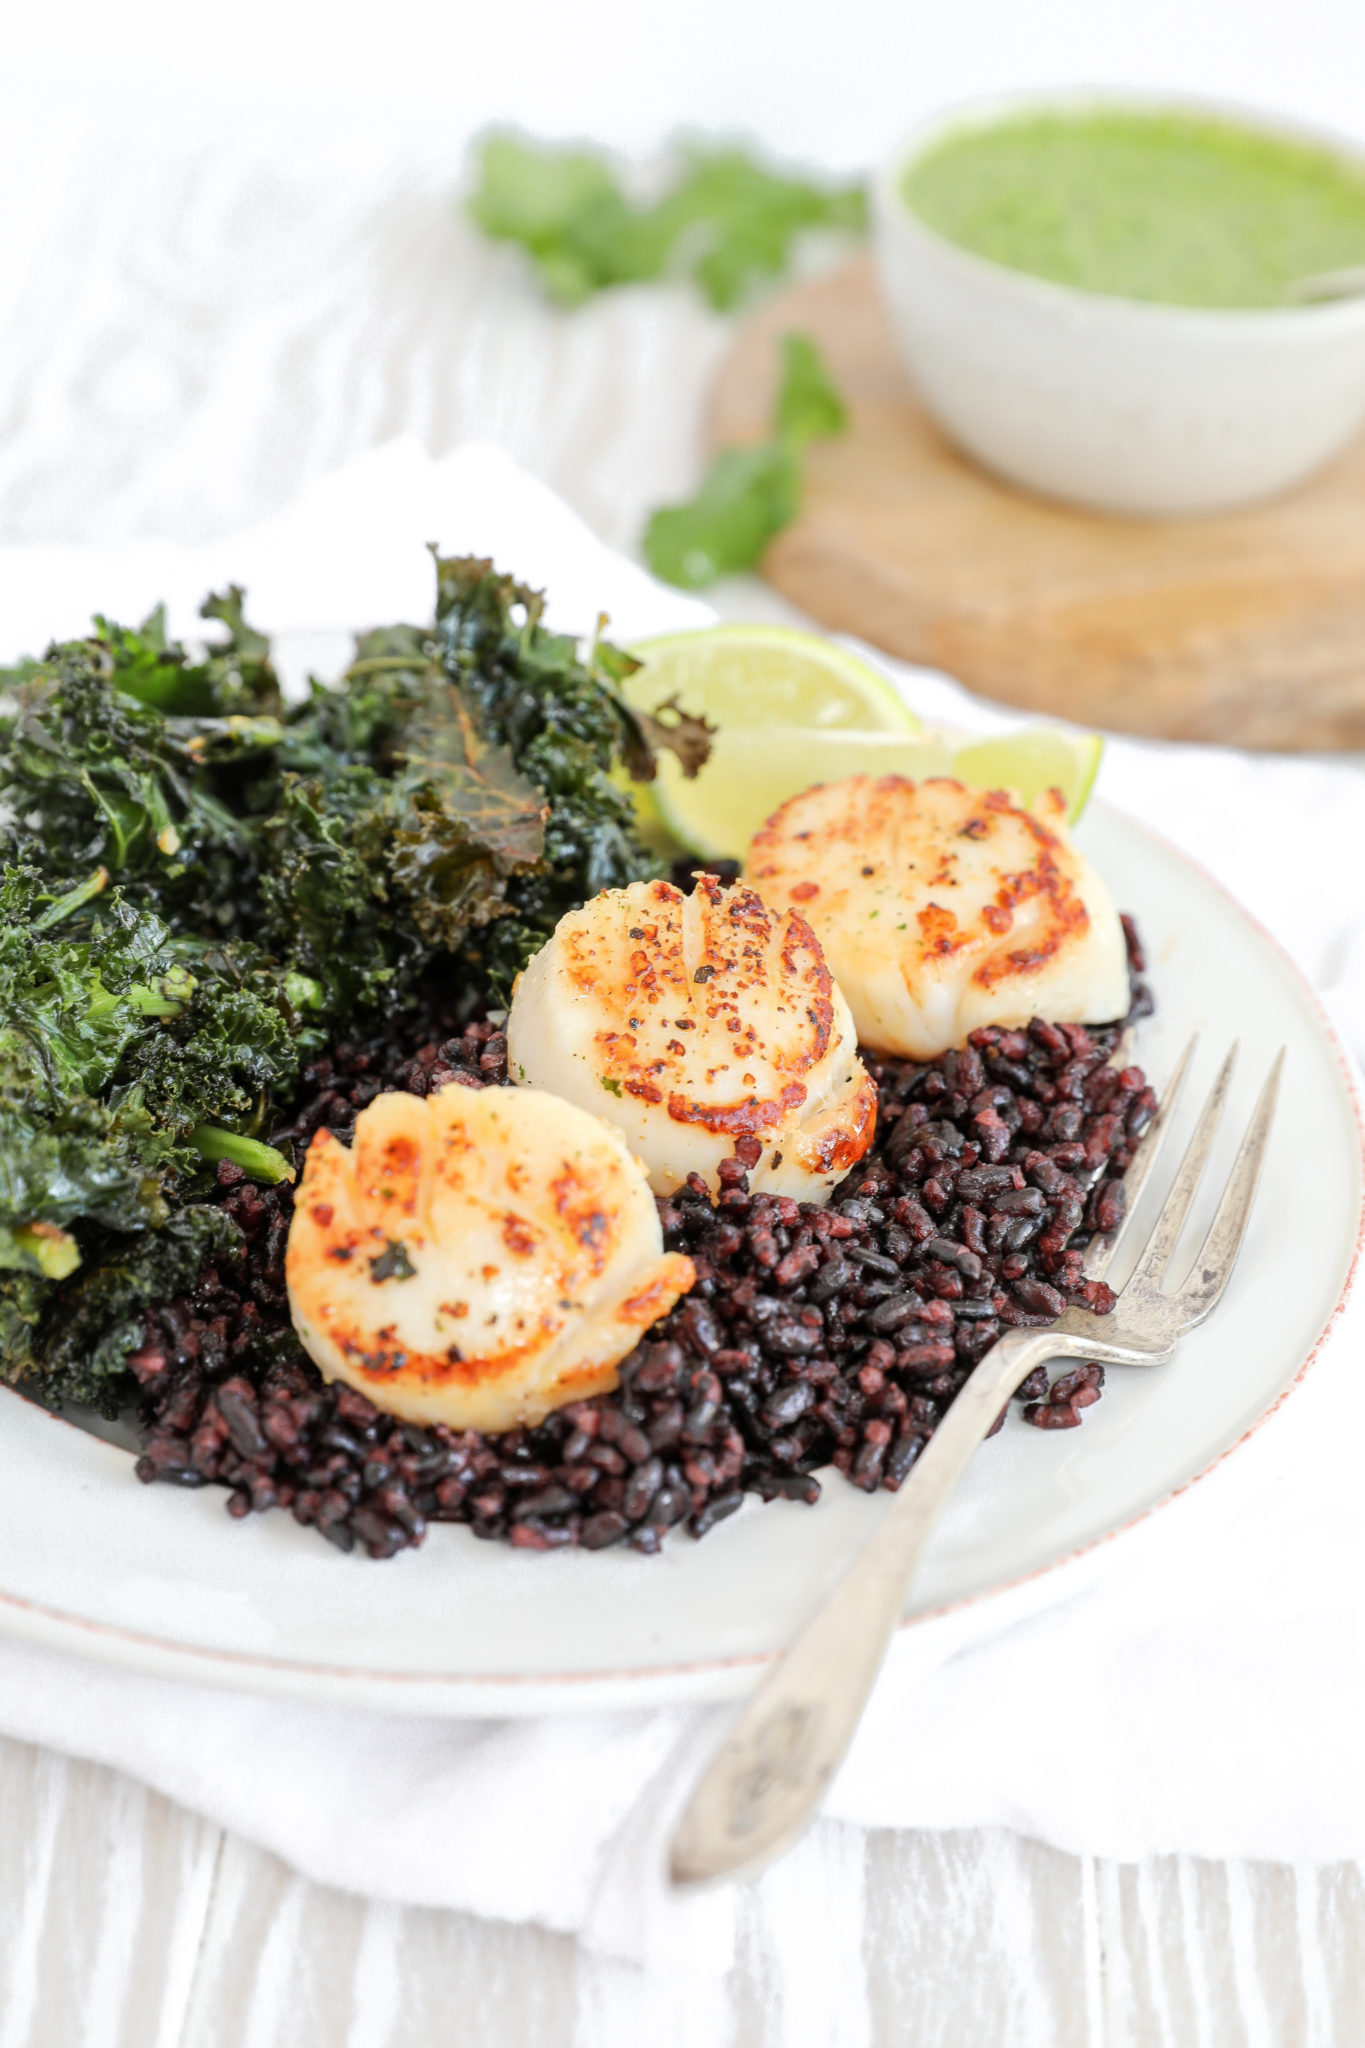 Seared scallops on black rice with kale on a white plate.